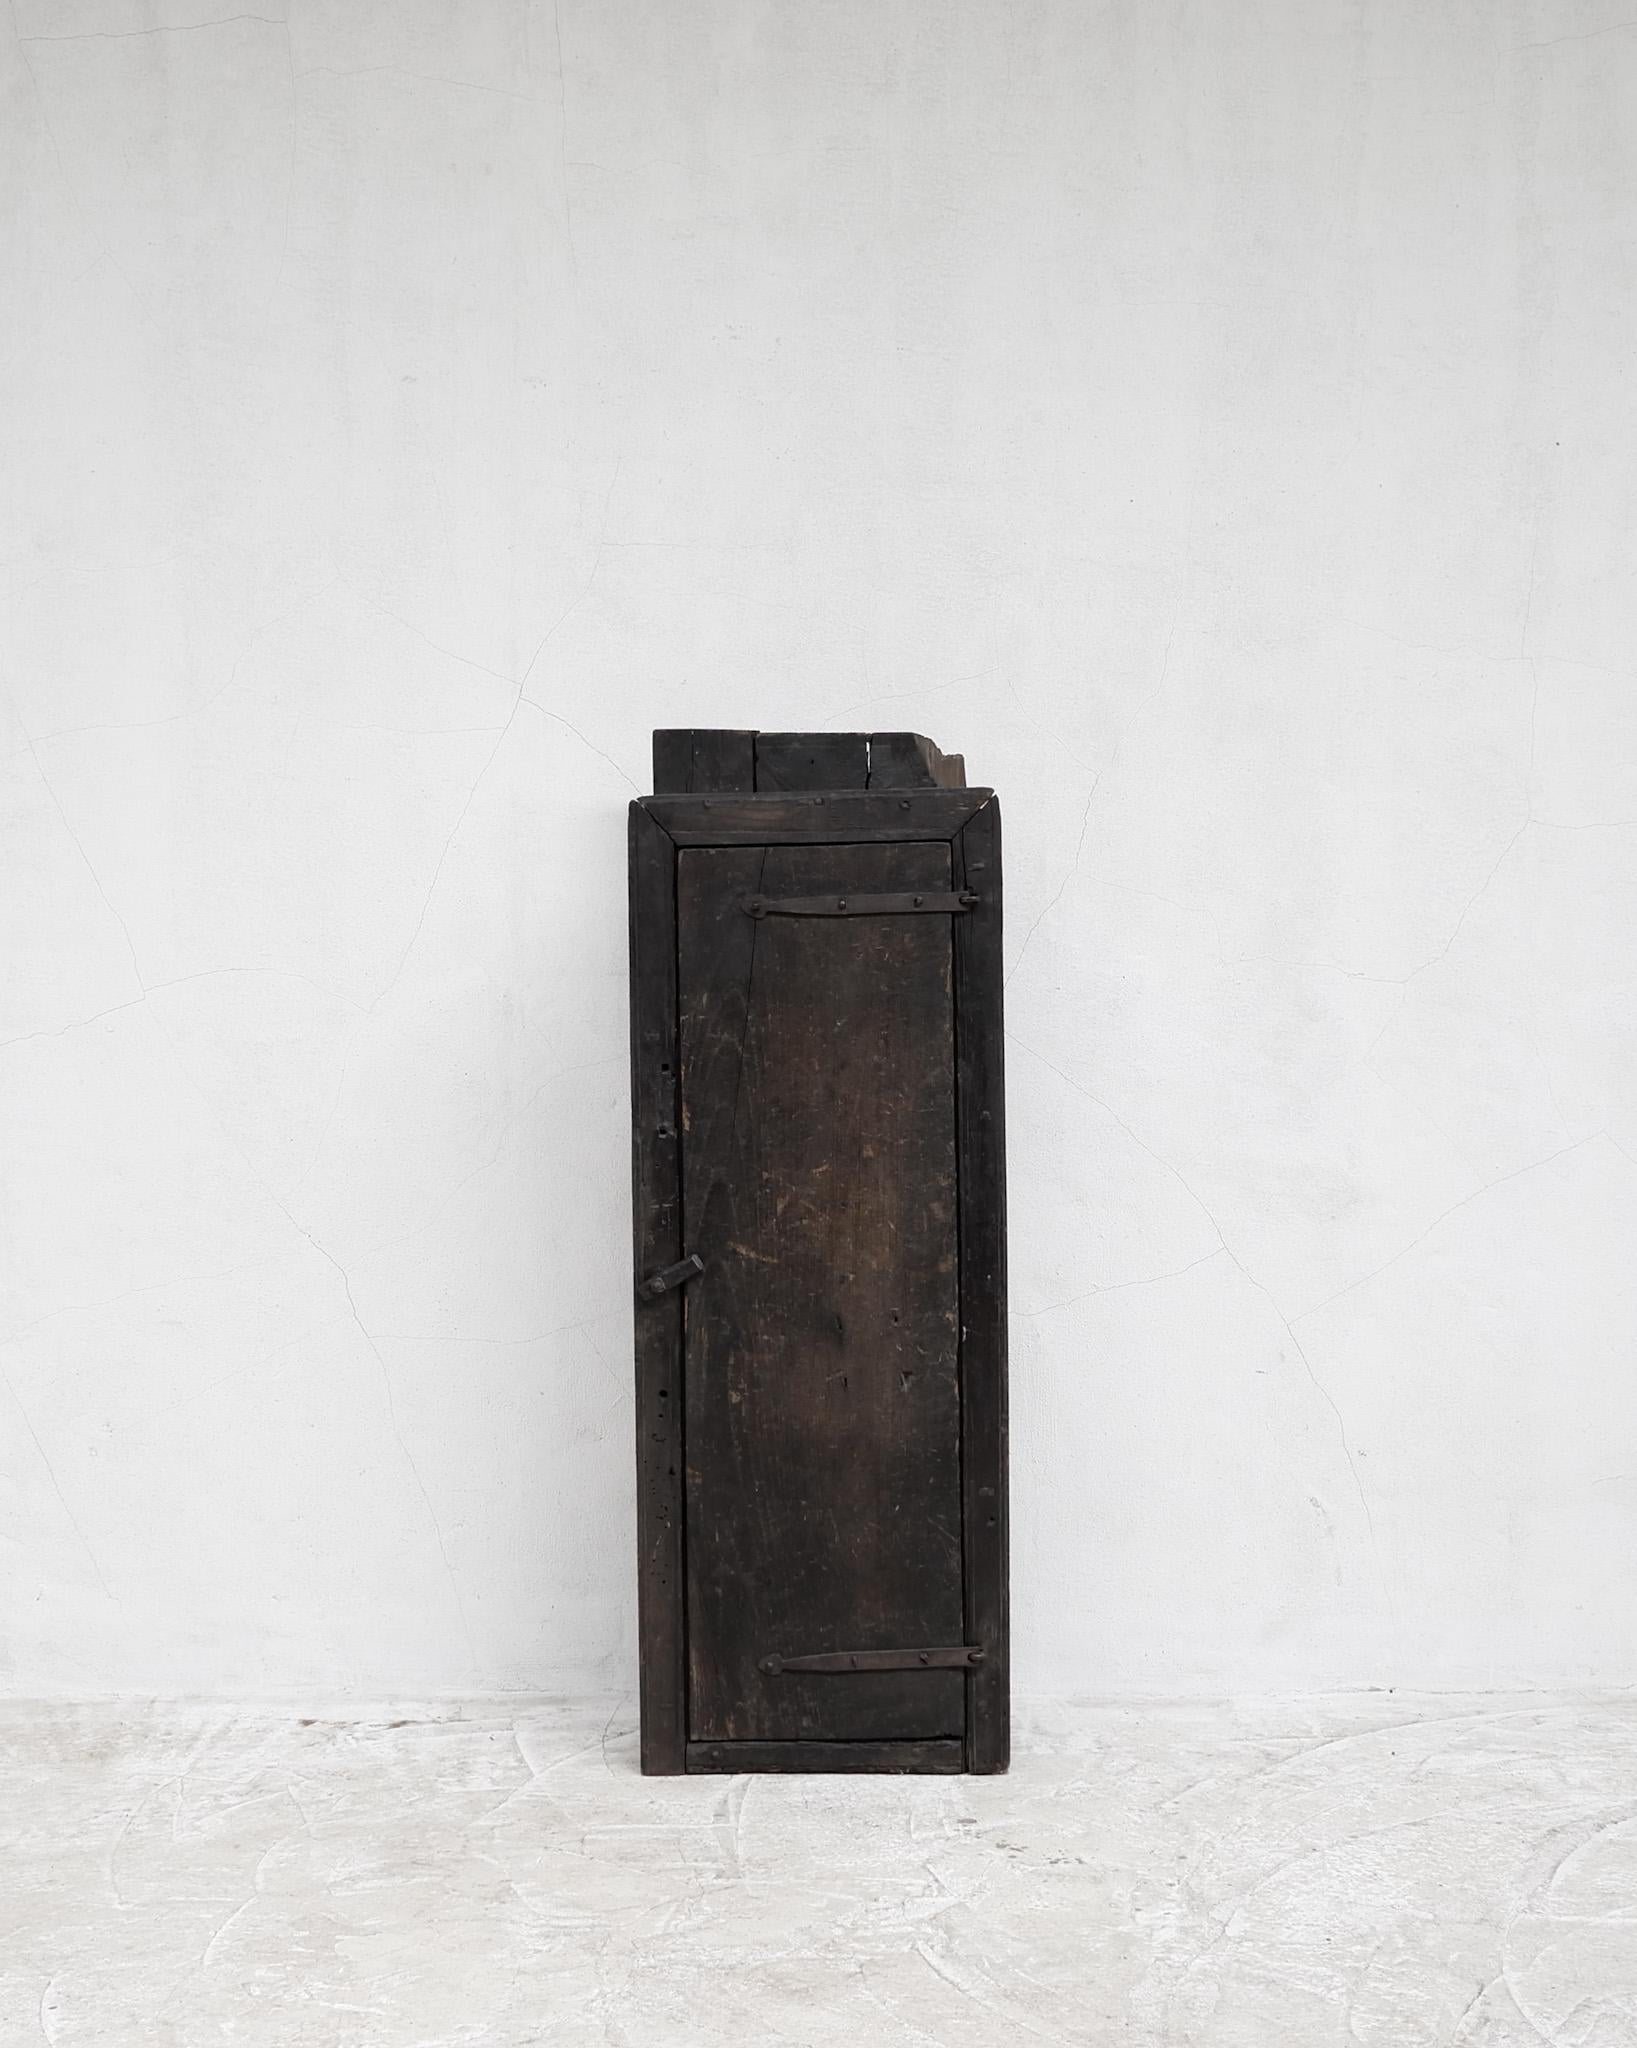 An exceptional Pyrenean 18th C. Mountain cupboard. 

Constructed from thick slabs of hewn chestnut. 

Heavily Heavily Patinated due to hundreds of years of use. 

Totally pure Spanish vernacular furniture. 

-

We offer free shipping to the